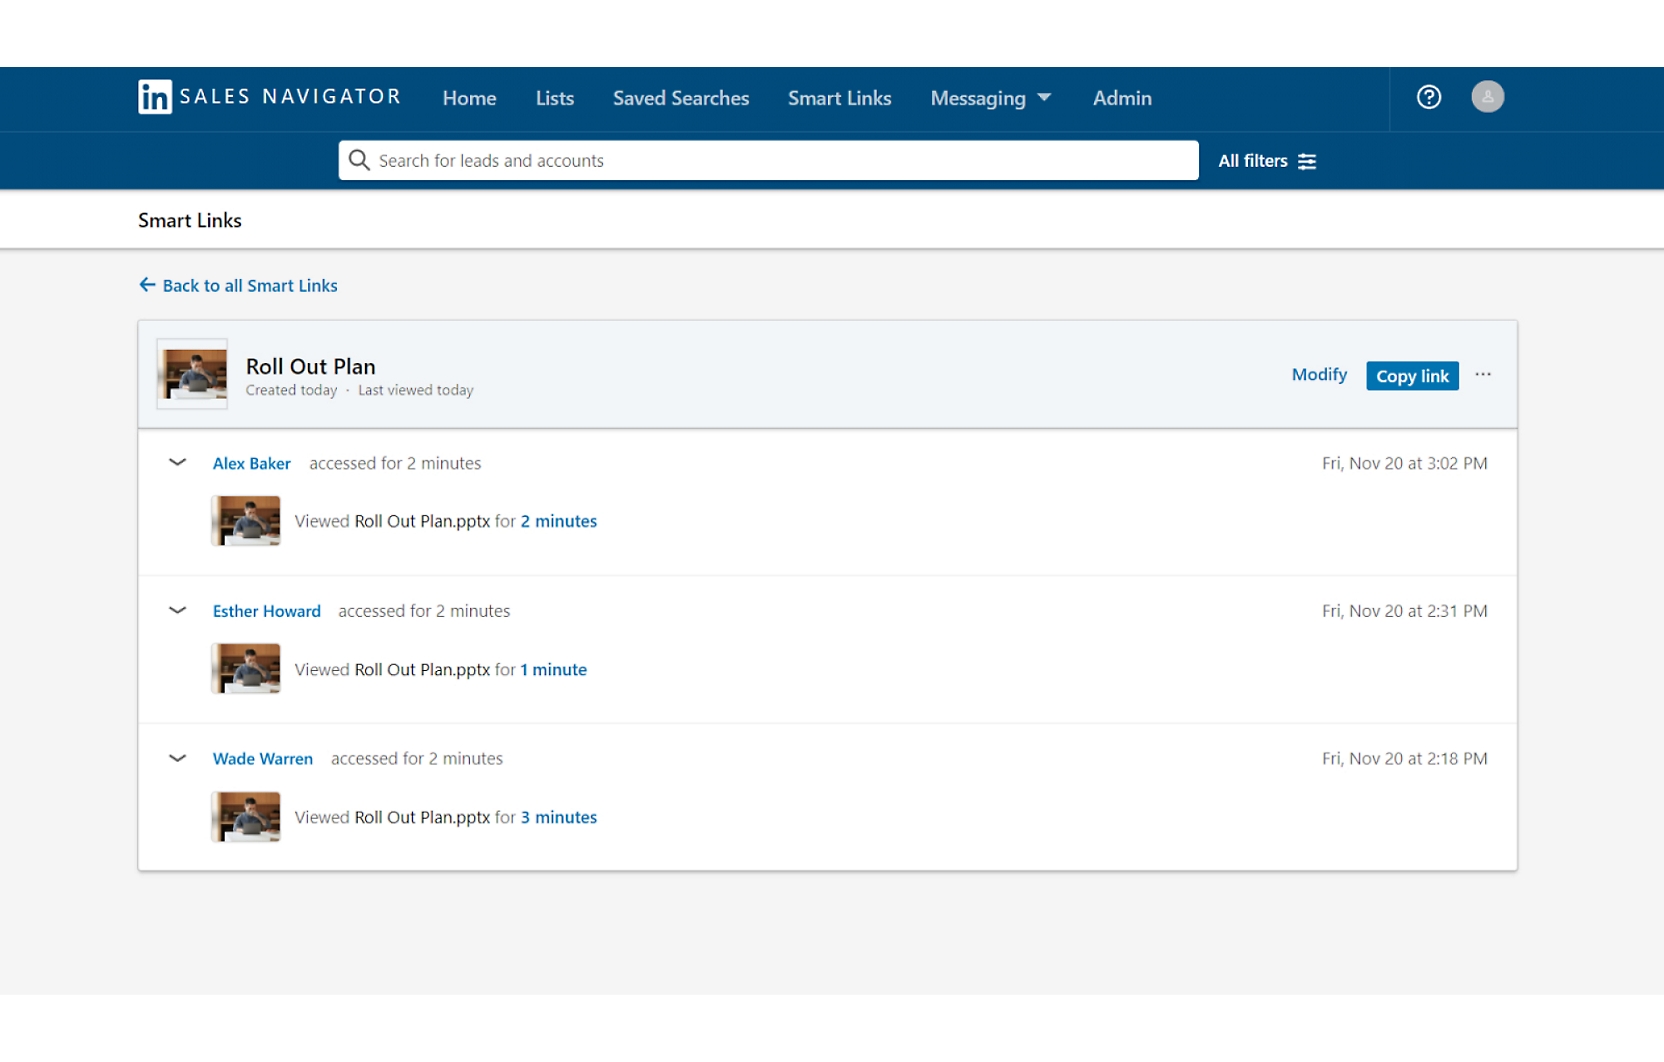 Screenshot of LinkedIn Sales Navigator showing a "Roll Out Plan" document with three users, Alex Baker, Esther Howard, and Wade Warren